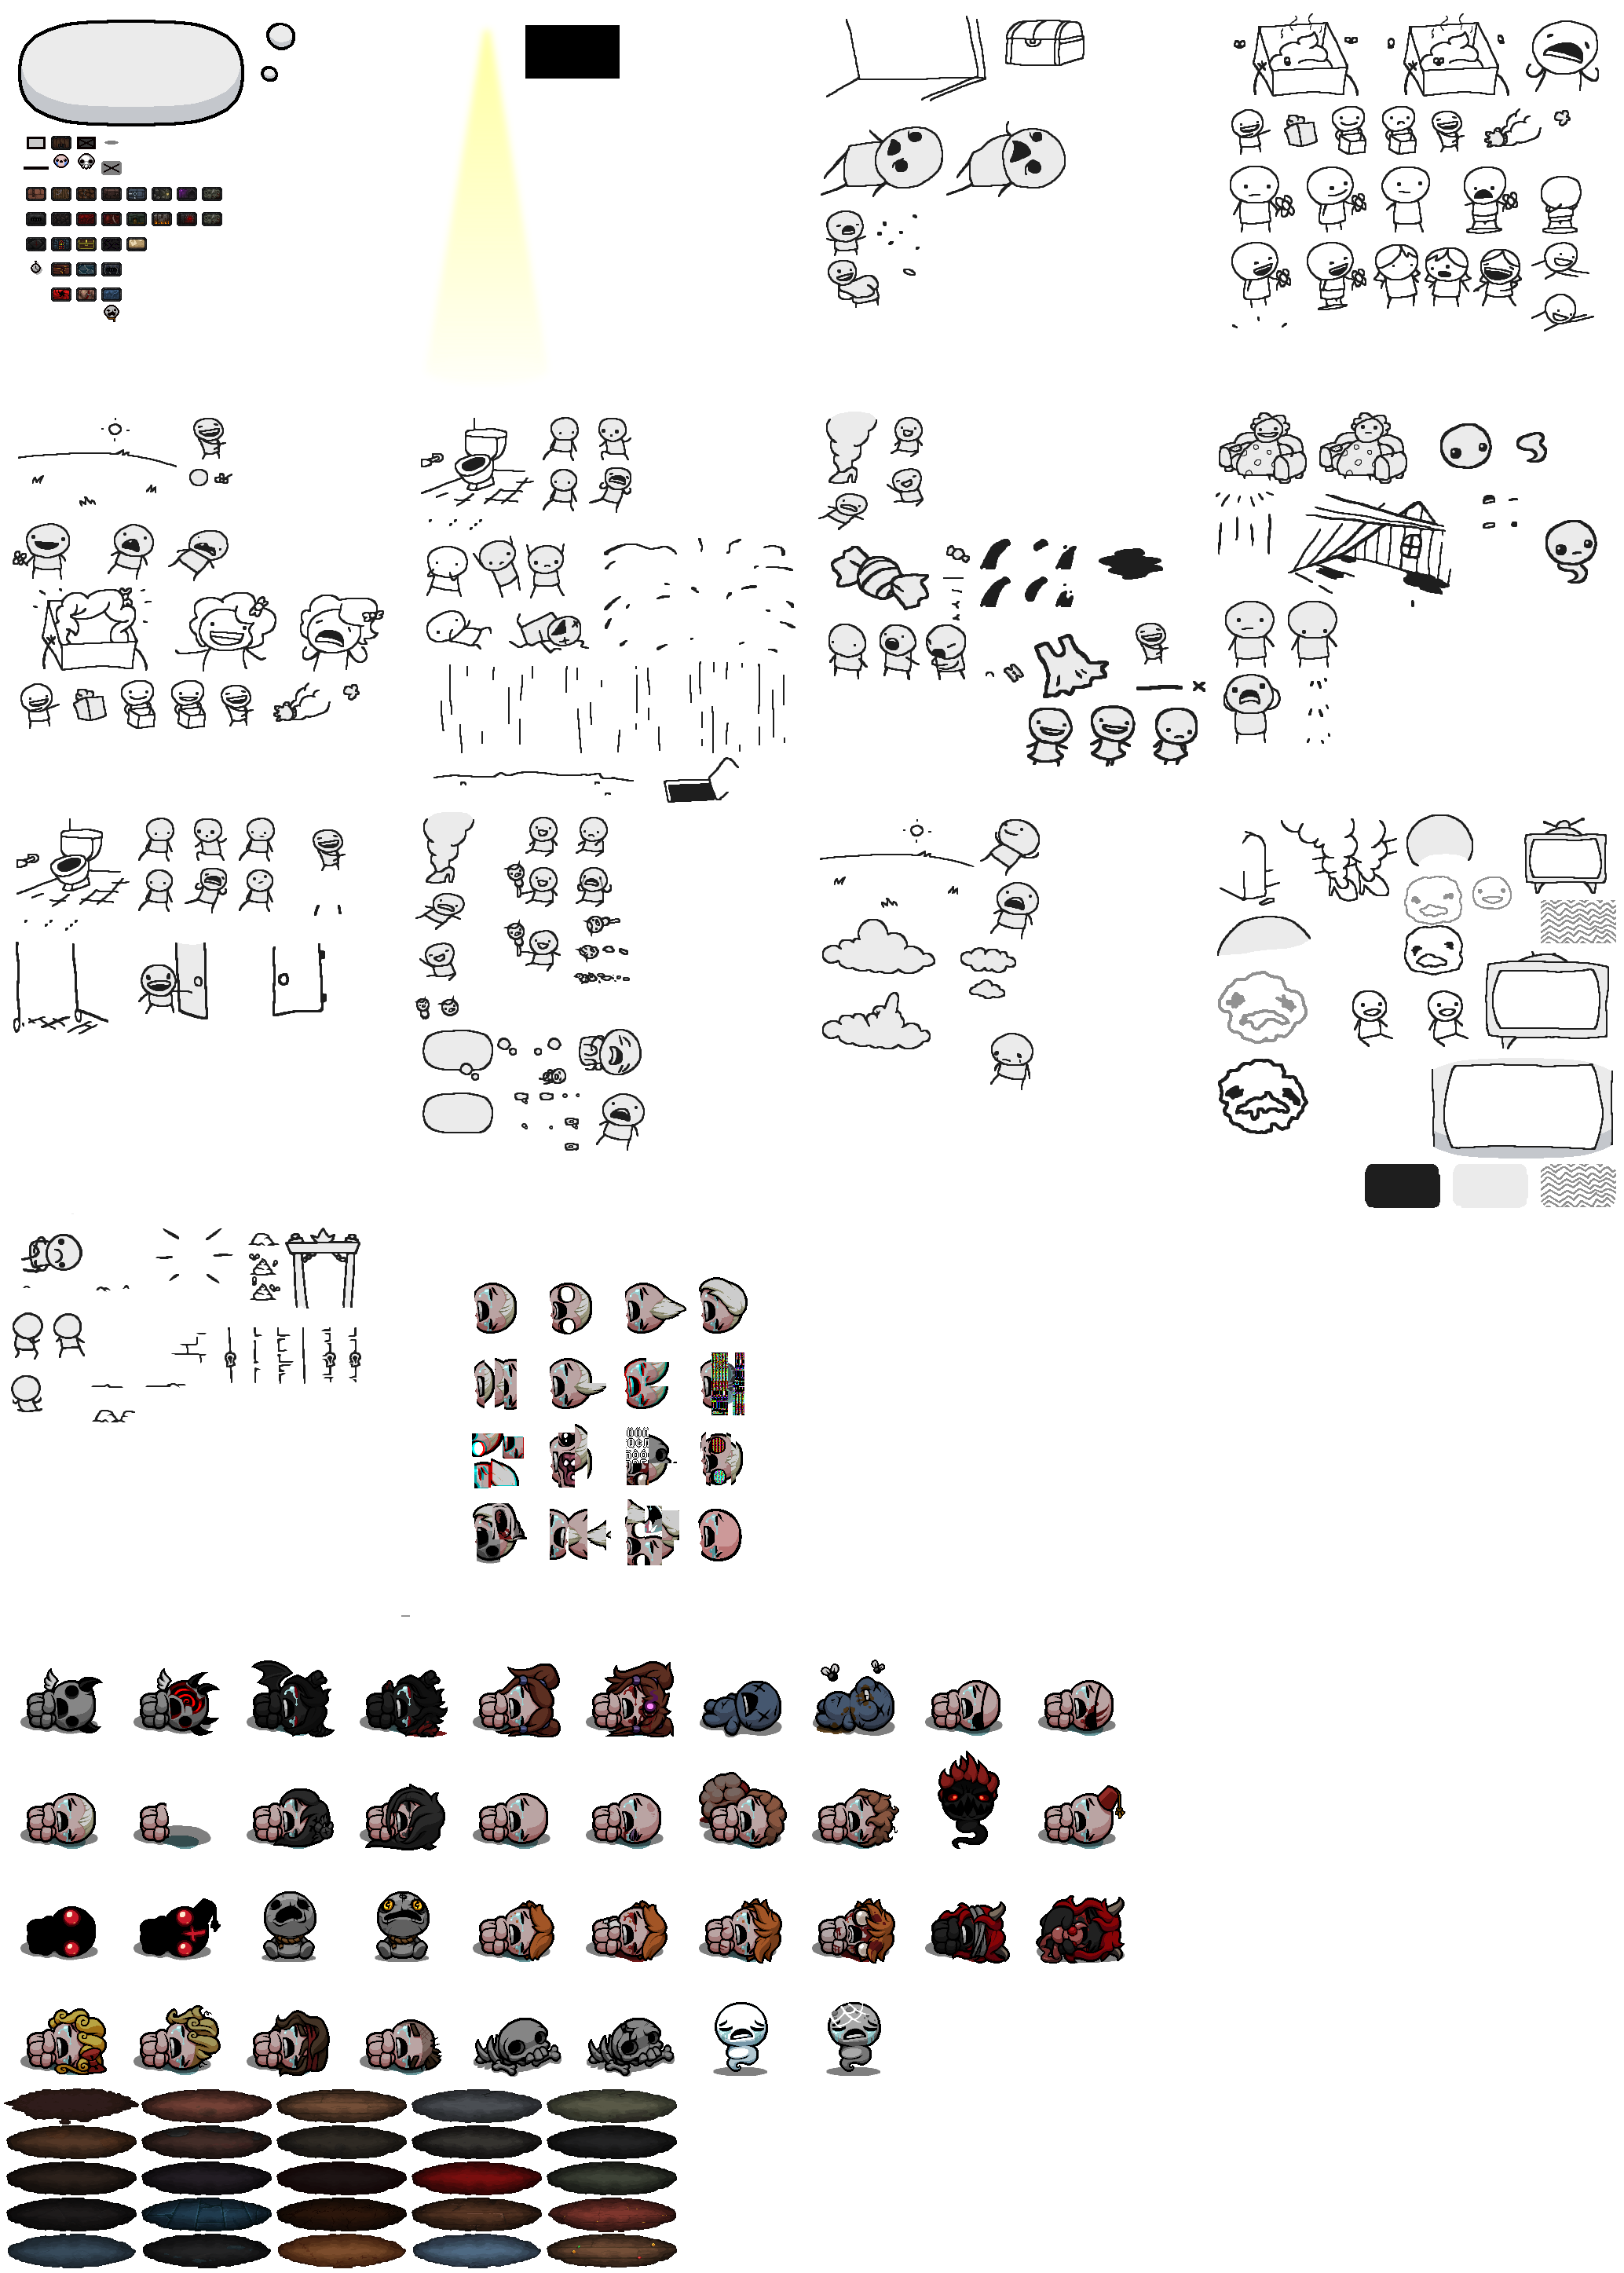 The Binding of Isaac: Rebirth - Nightmare Sequence + Related Assets